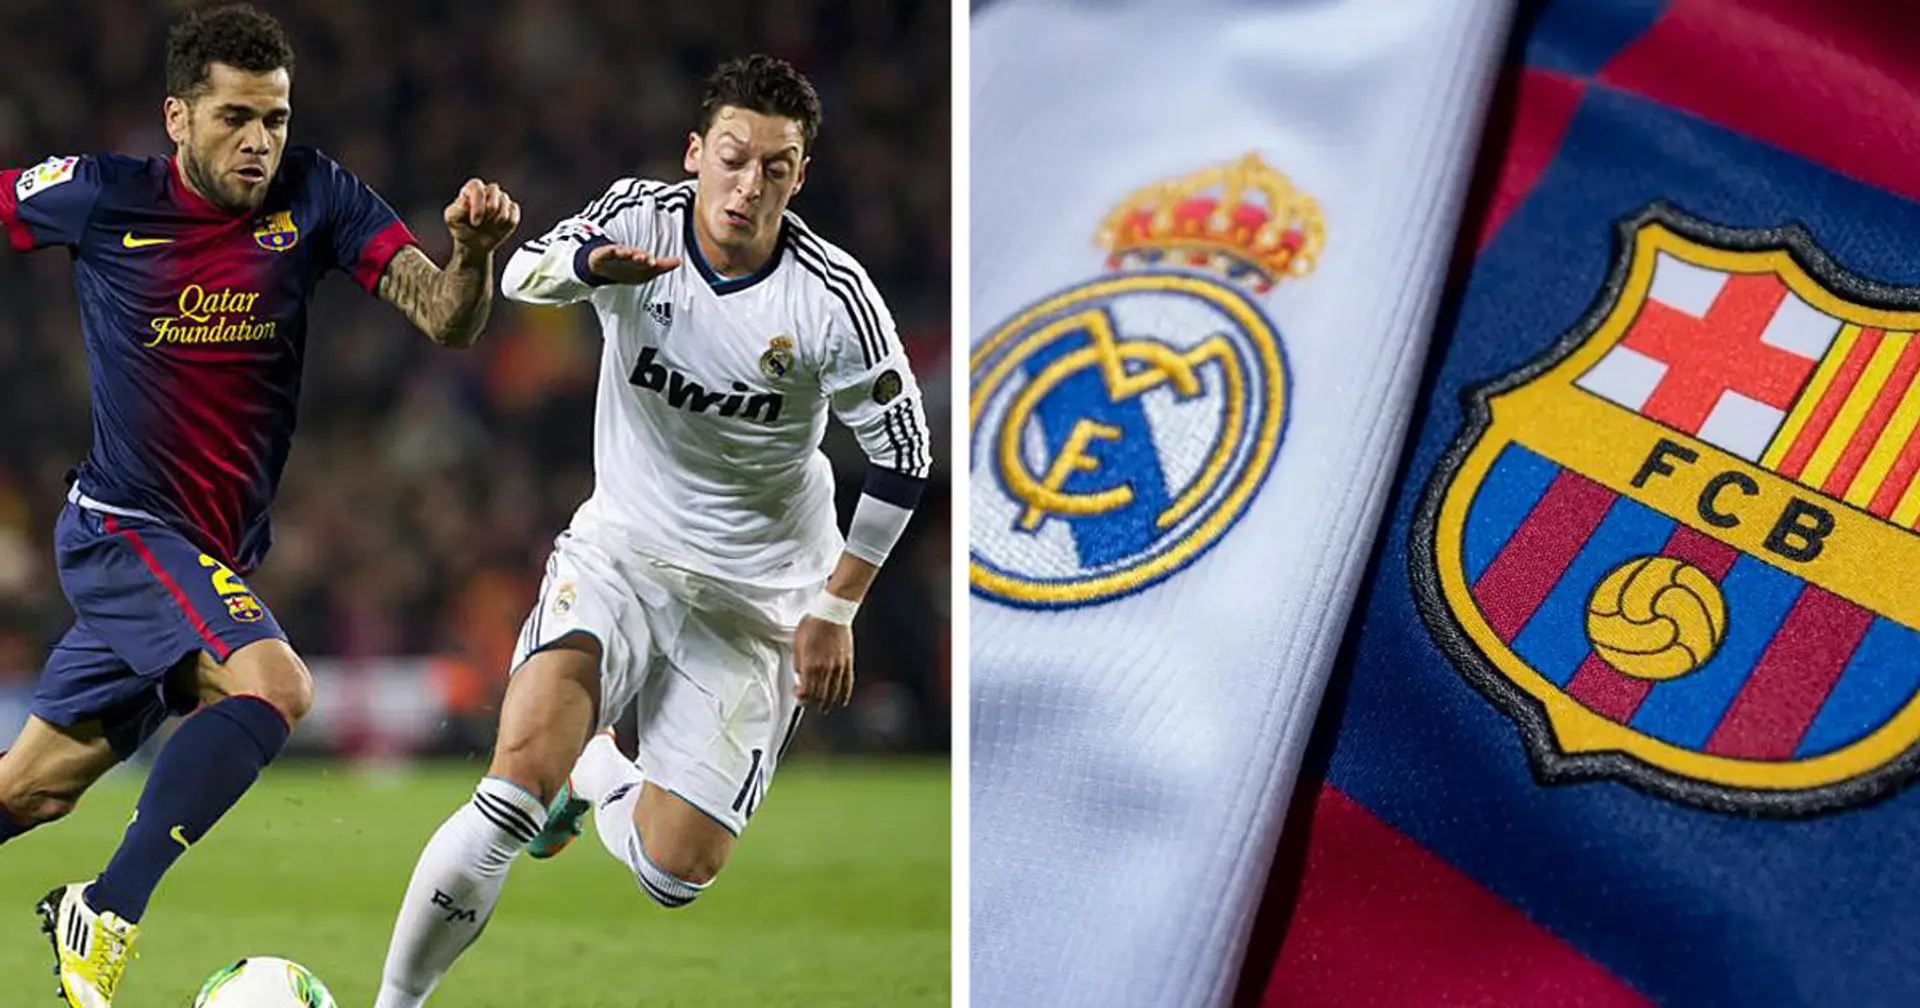 Mesut Ozil: "I think that El Clásico has gone down, which is not Real Madrid's fault - the problem is Barça"